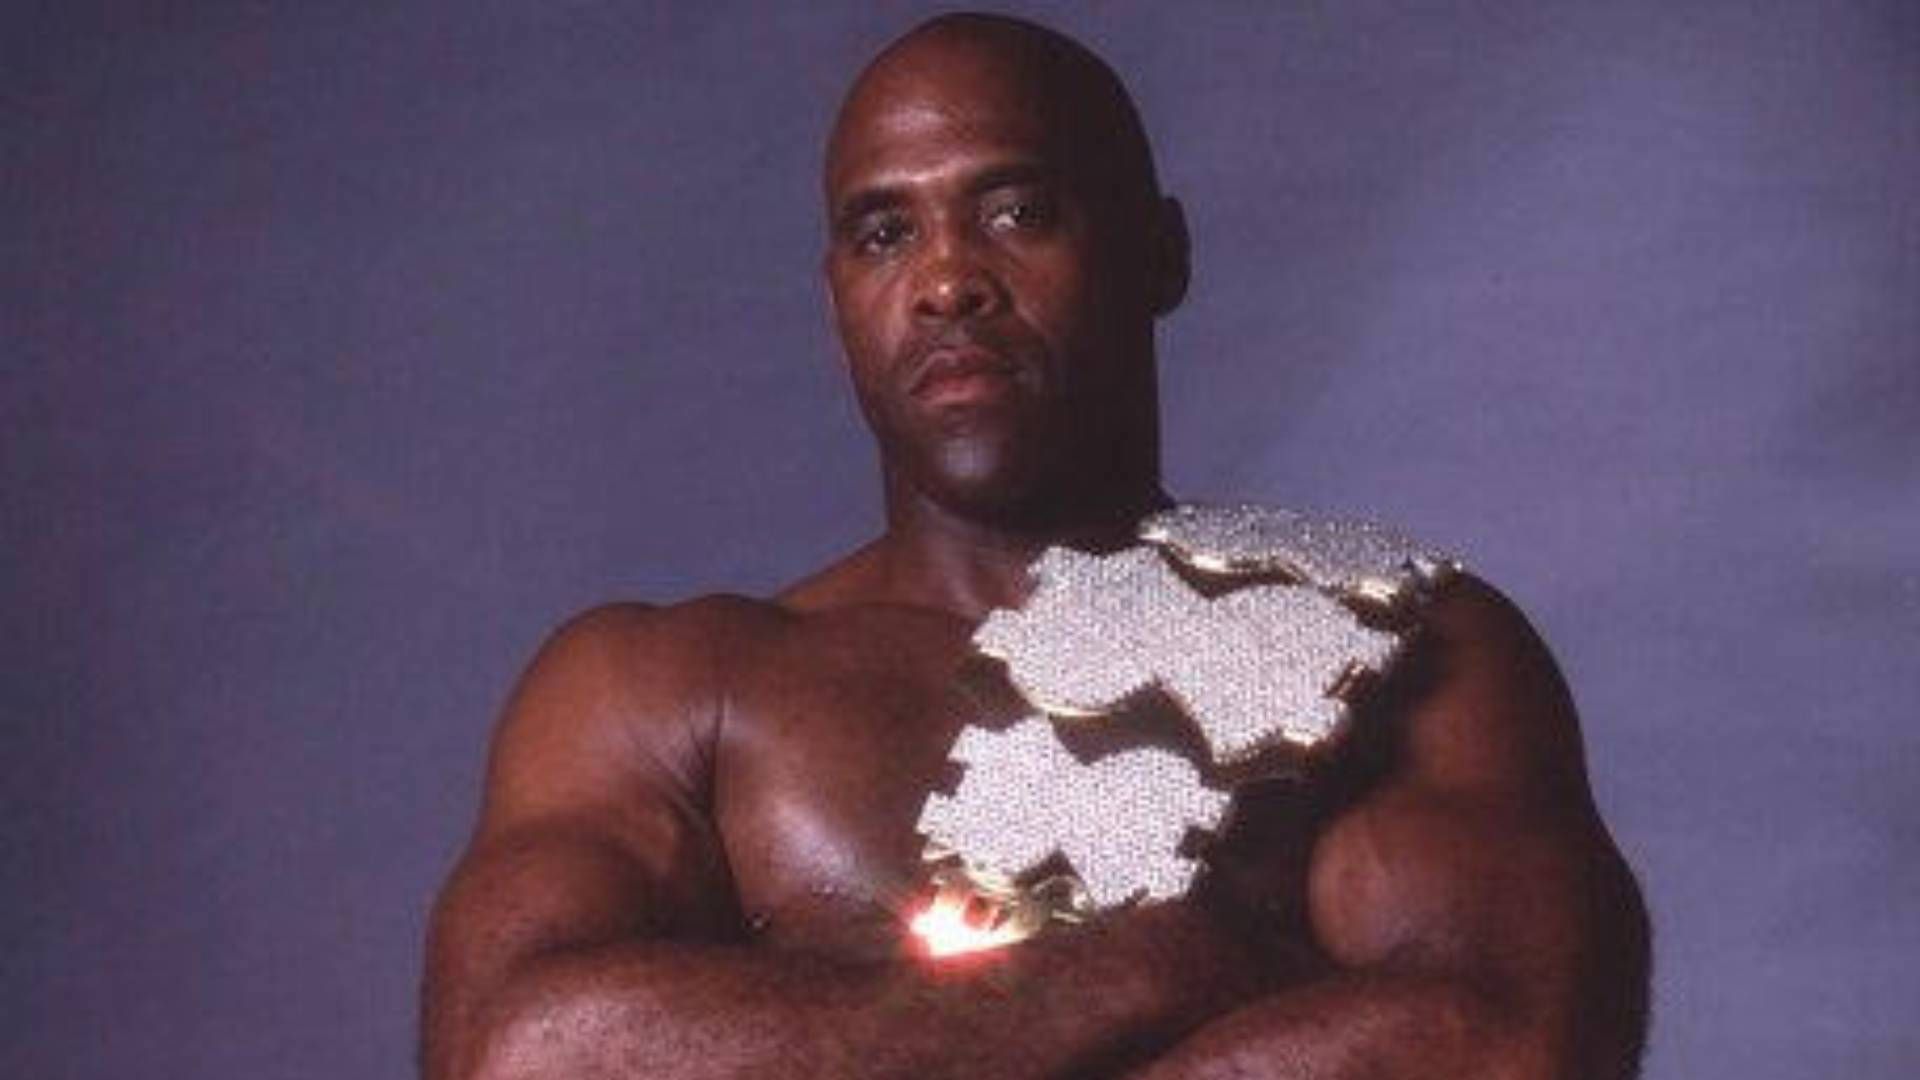 'Unique individual': Pro wrestler and former WWF star Virgil dies, aged 61